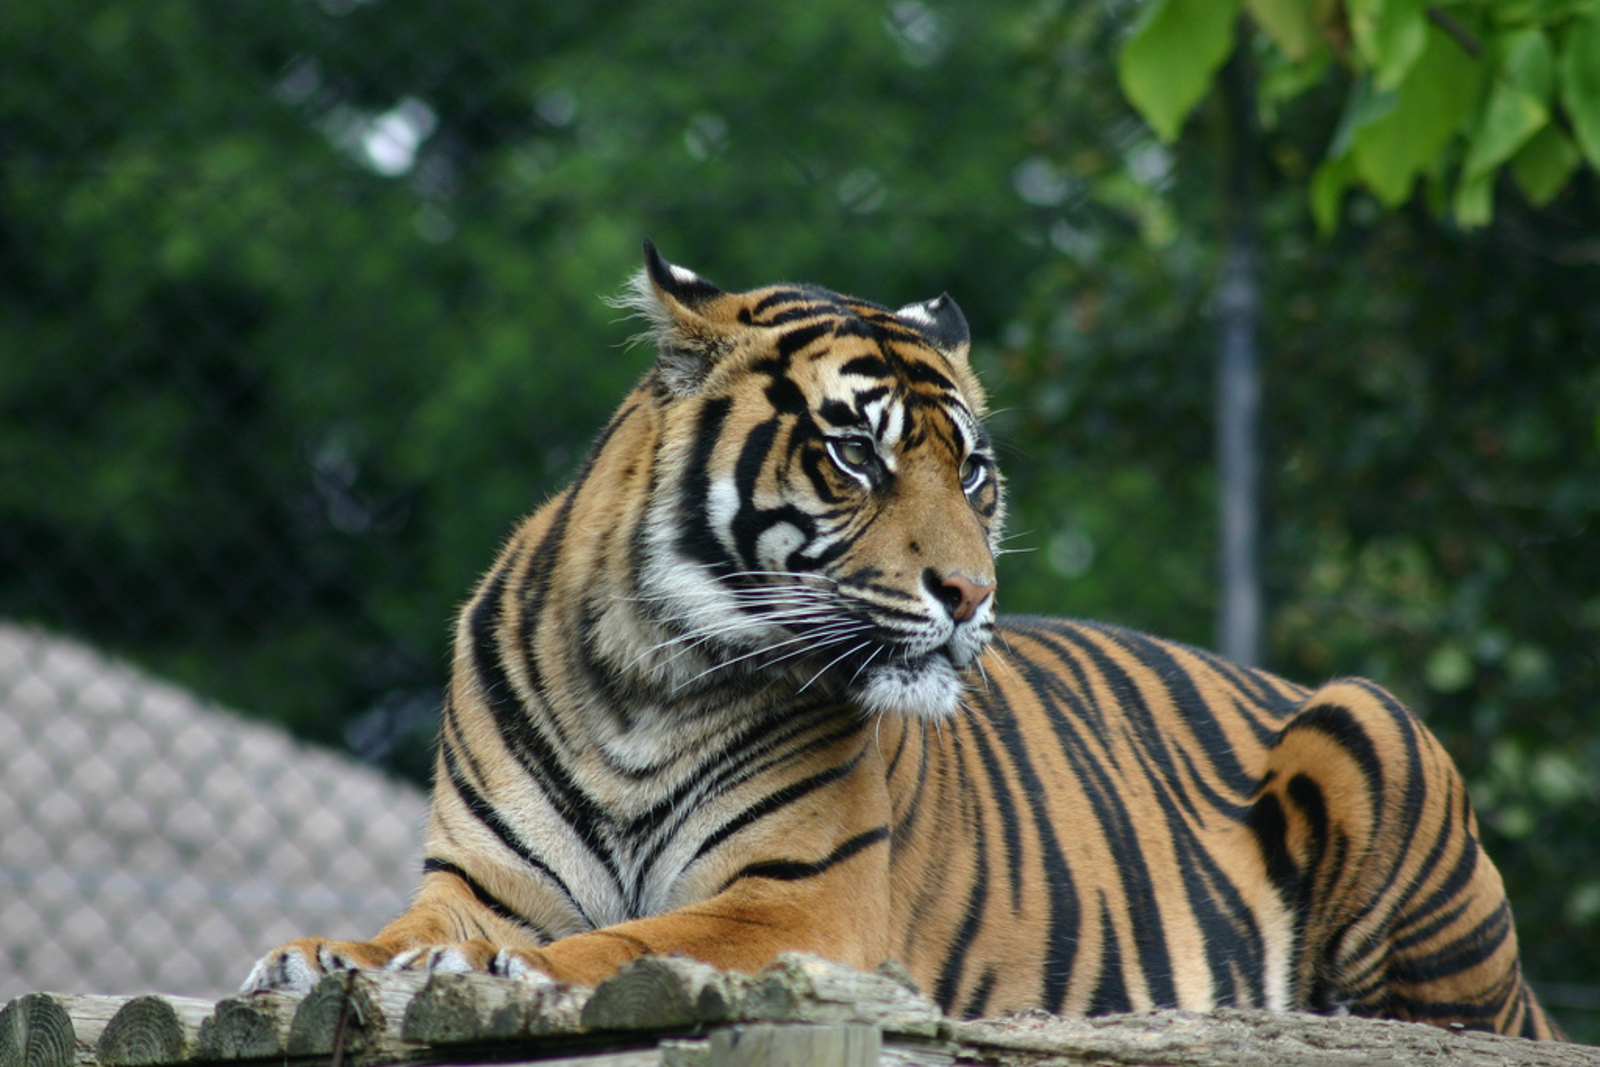 Tiger Farming: Why it's a Threat to Wild Tigers